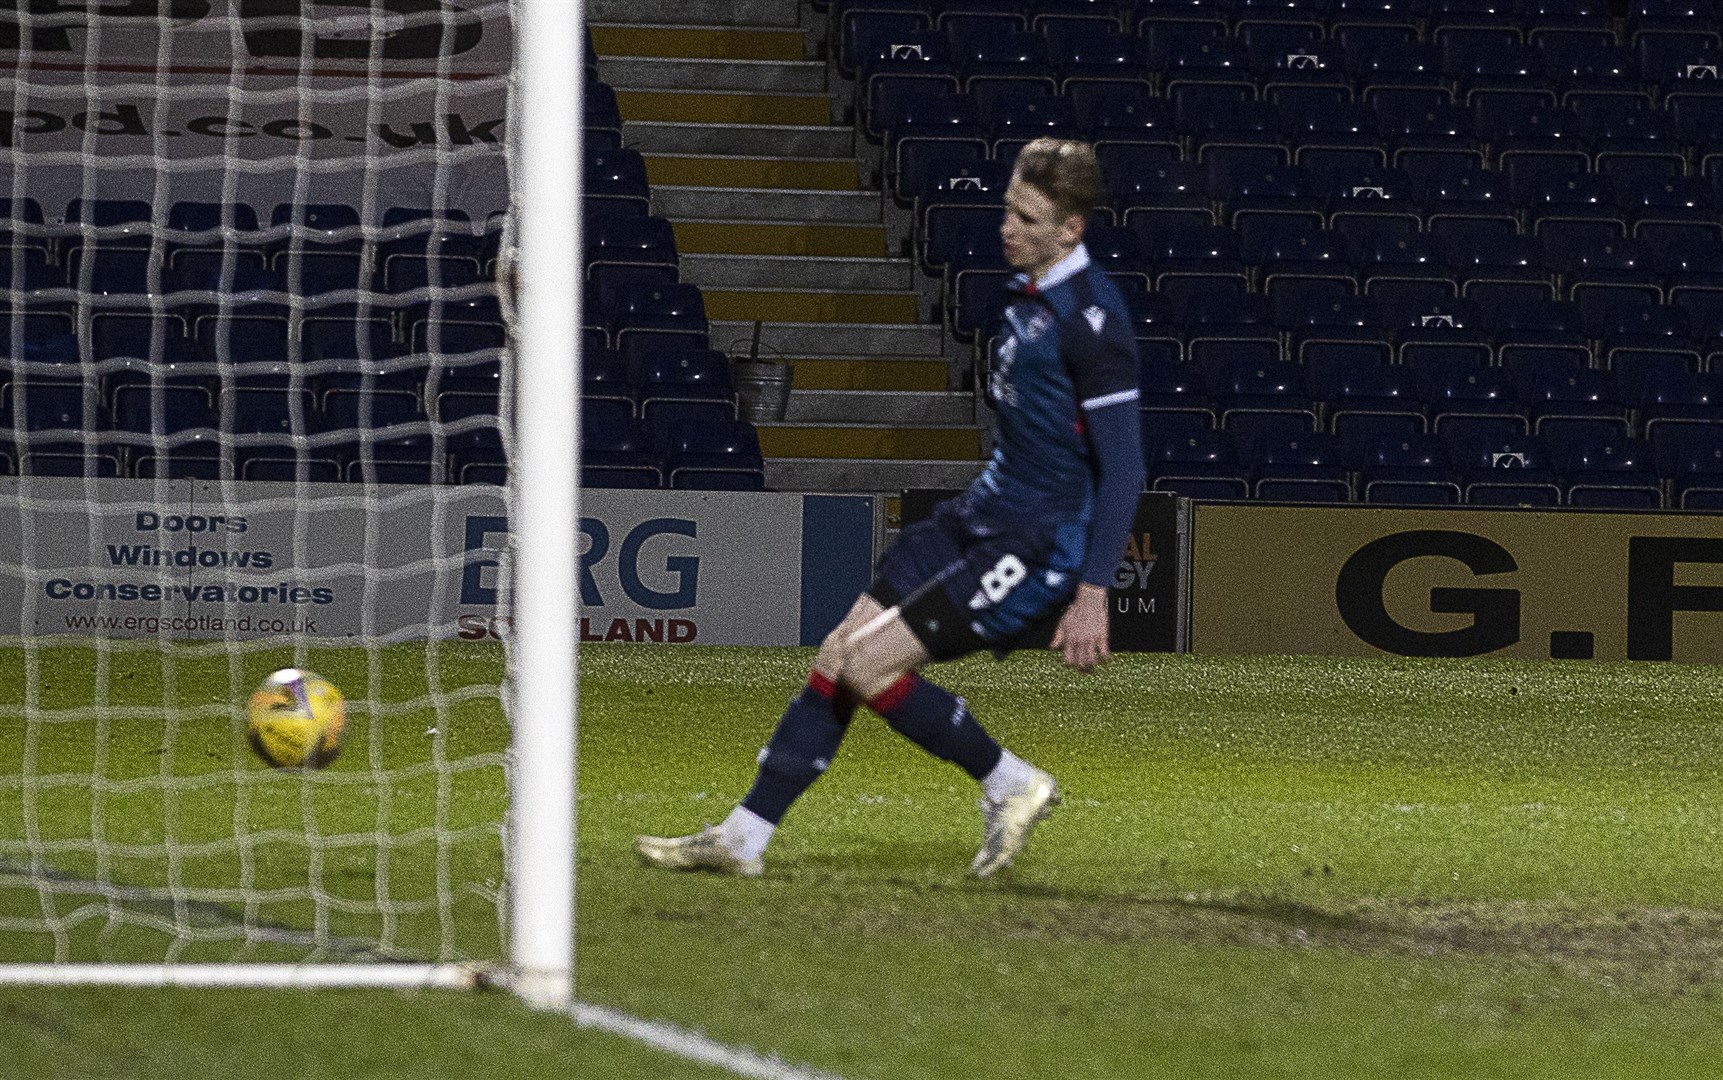 Picture - Ken Macpherson, Inverness. Ross County(1) v Motherwell(2). 27.01.21. Ross County's Oli Shaw scores into an empty goal after a strong shot from Jermaine Hylton was spilled by Motherwell 'keeper Liam Kelly into his path.